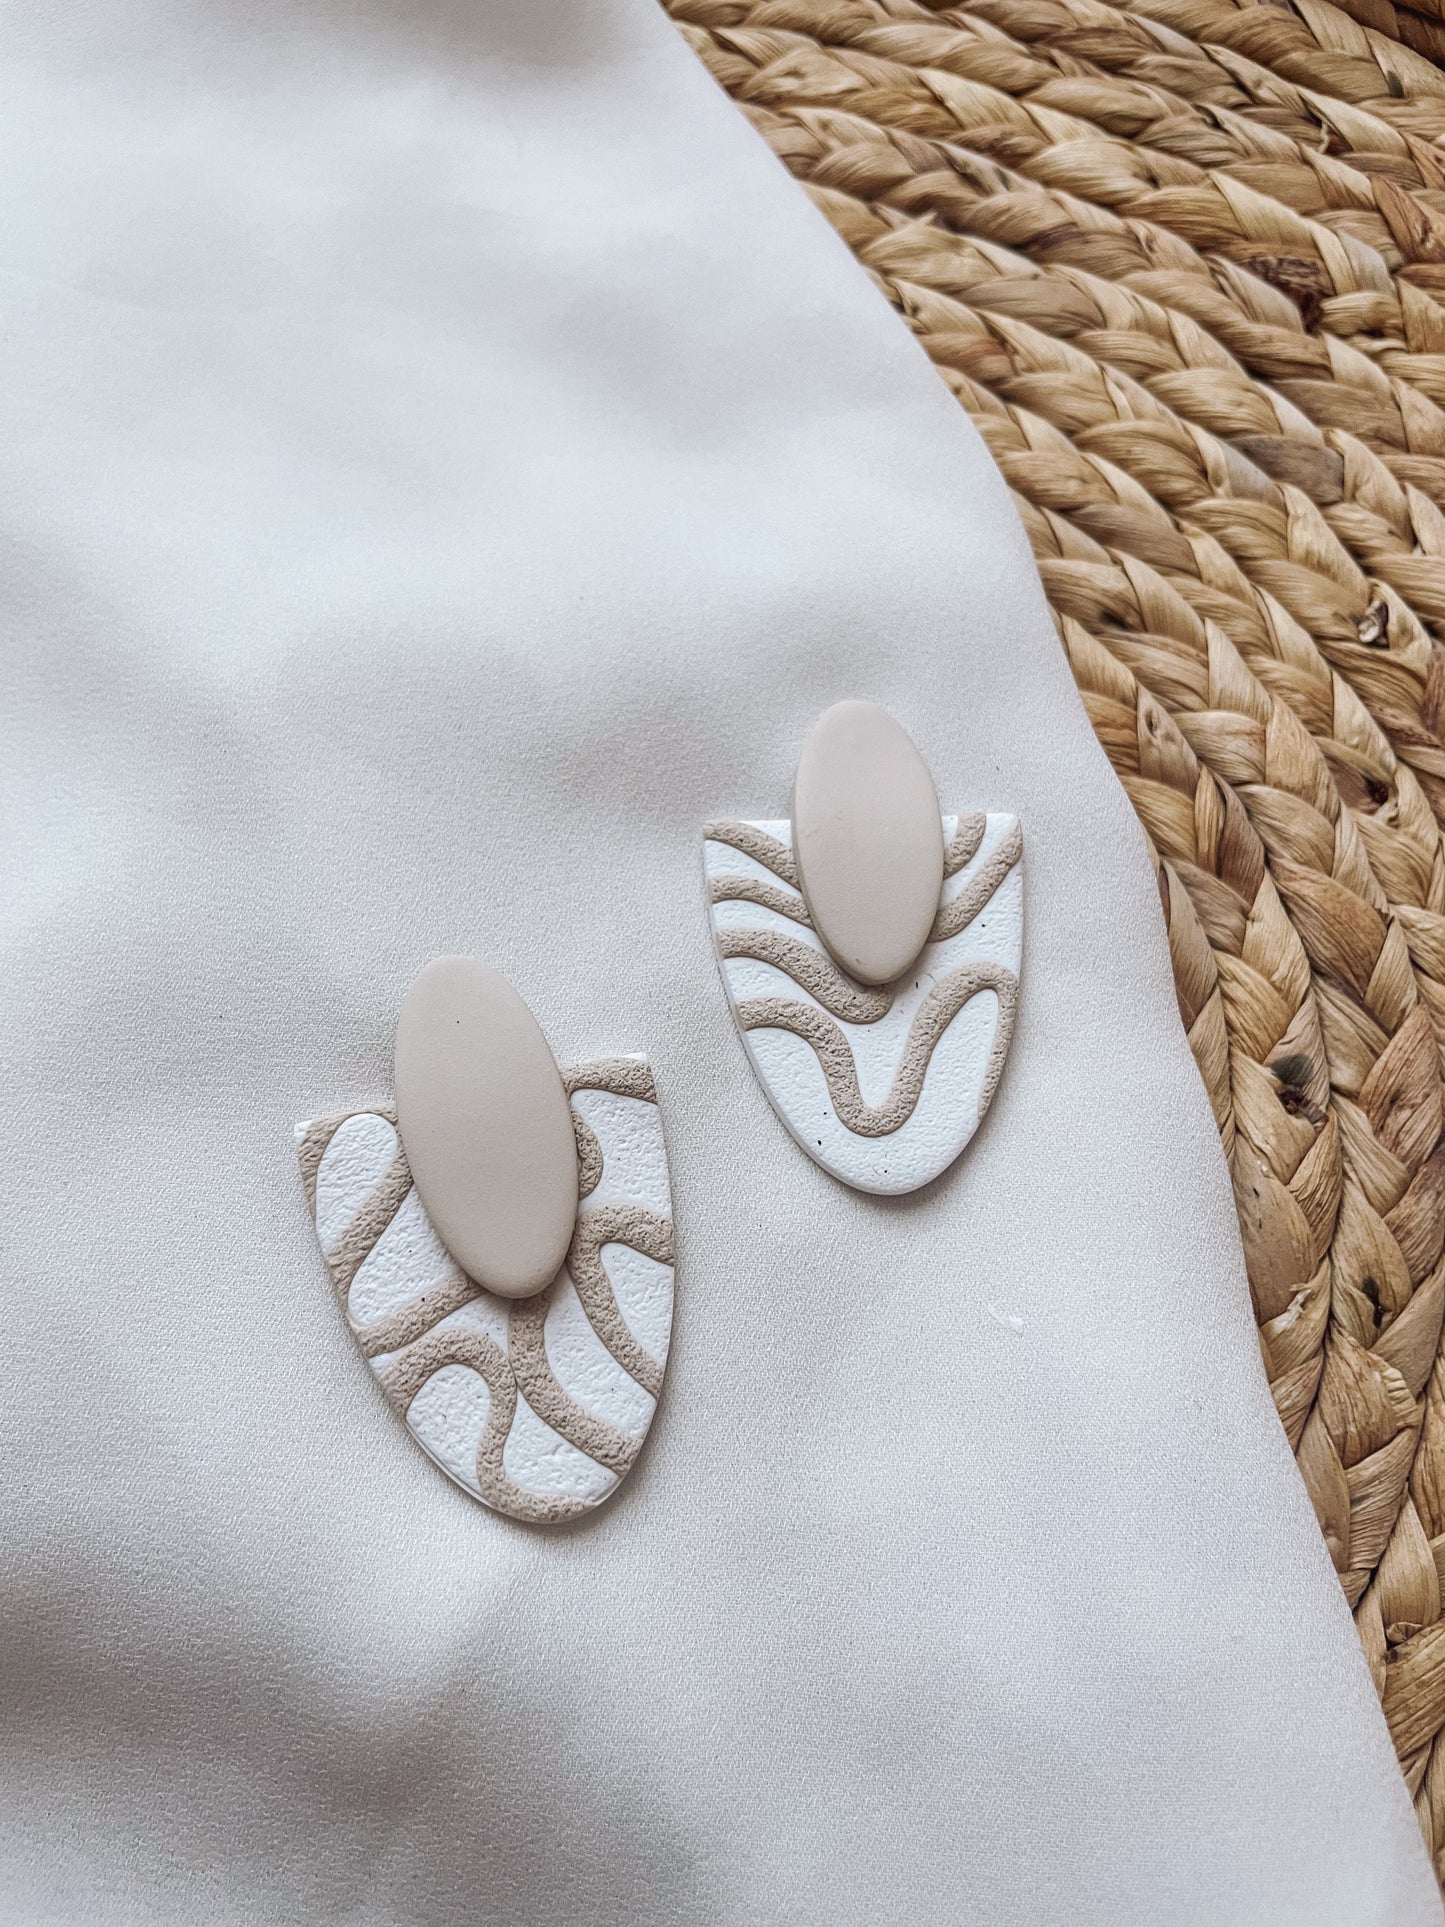 Neutral Art Deco Layered Earrings with Squiggle Details